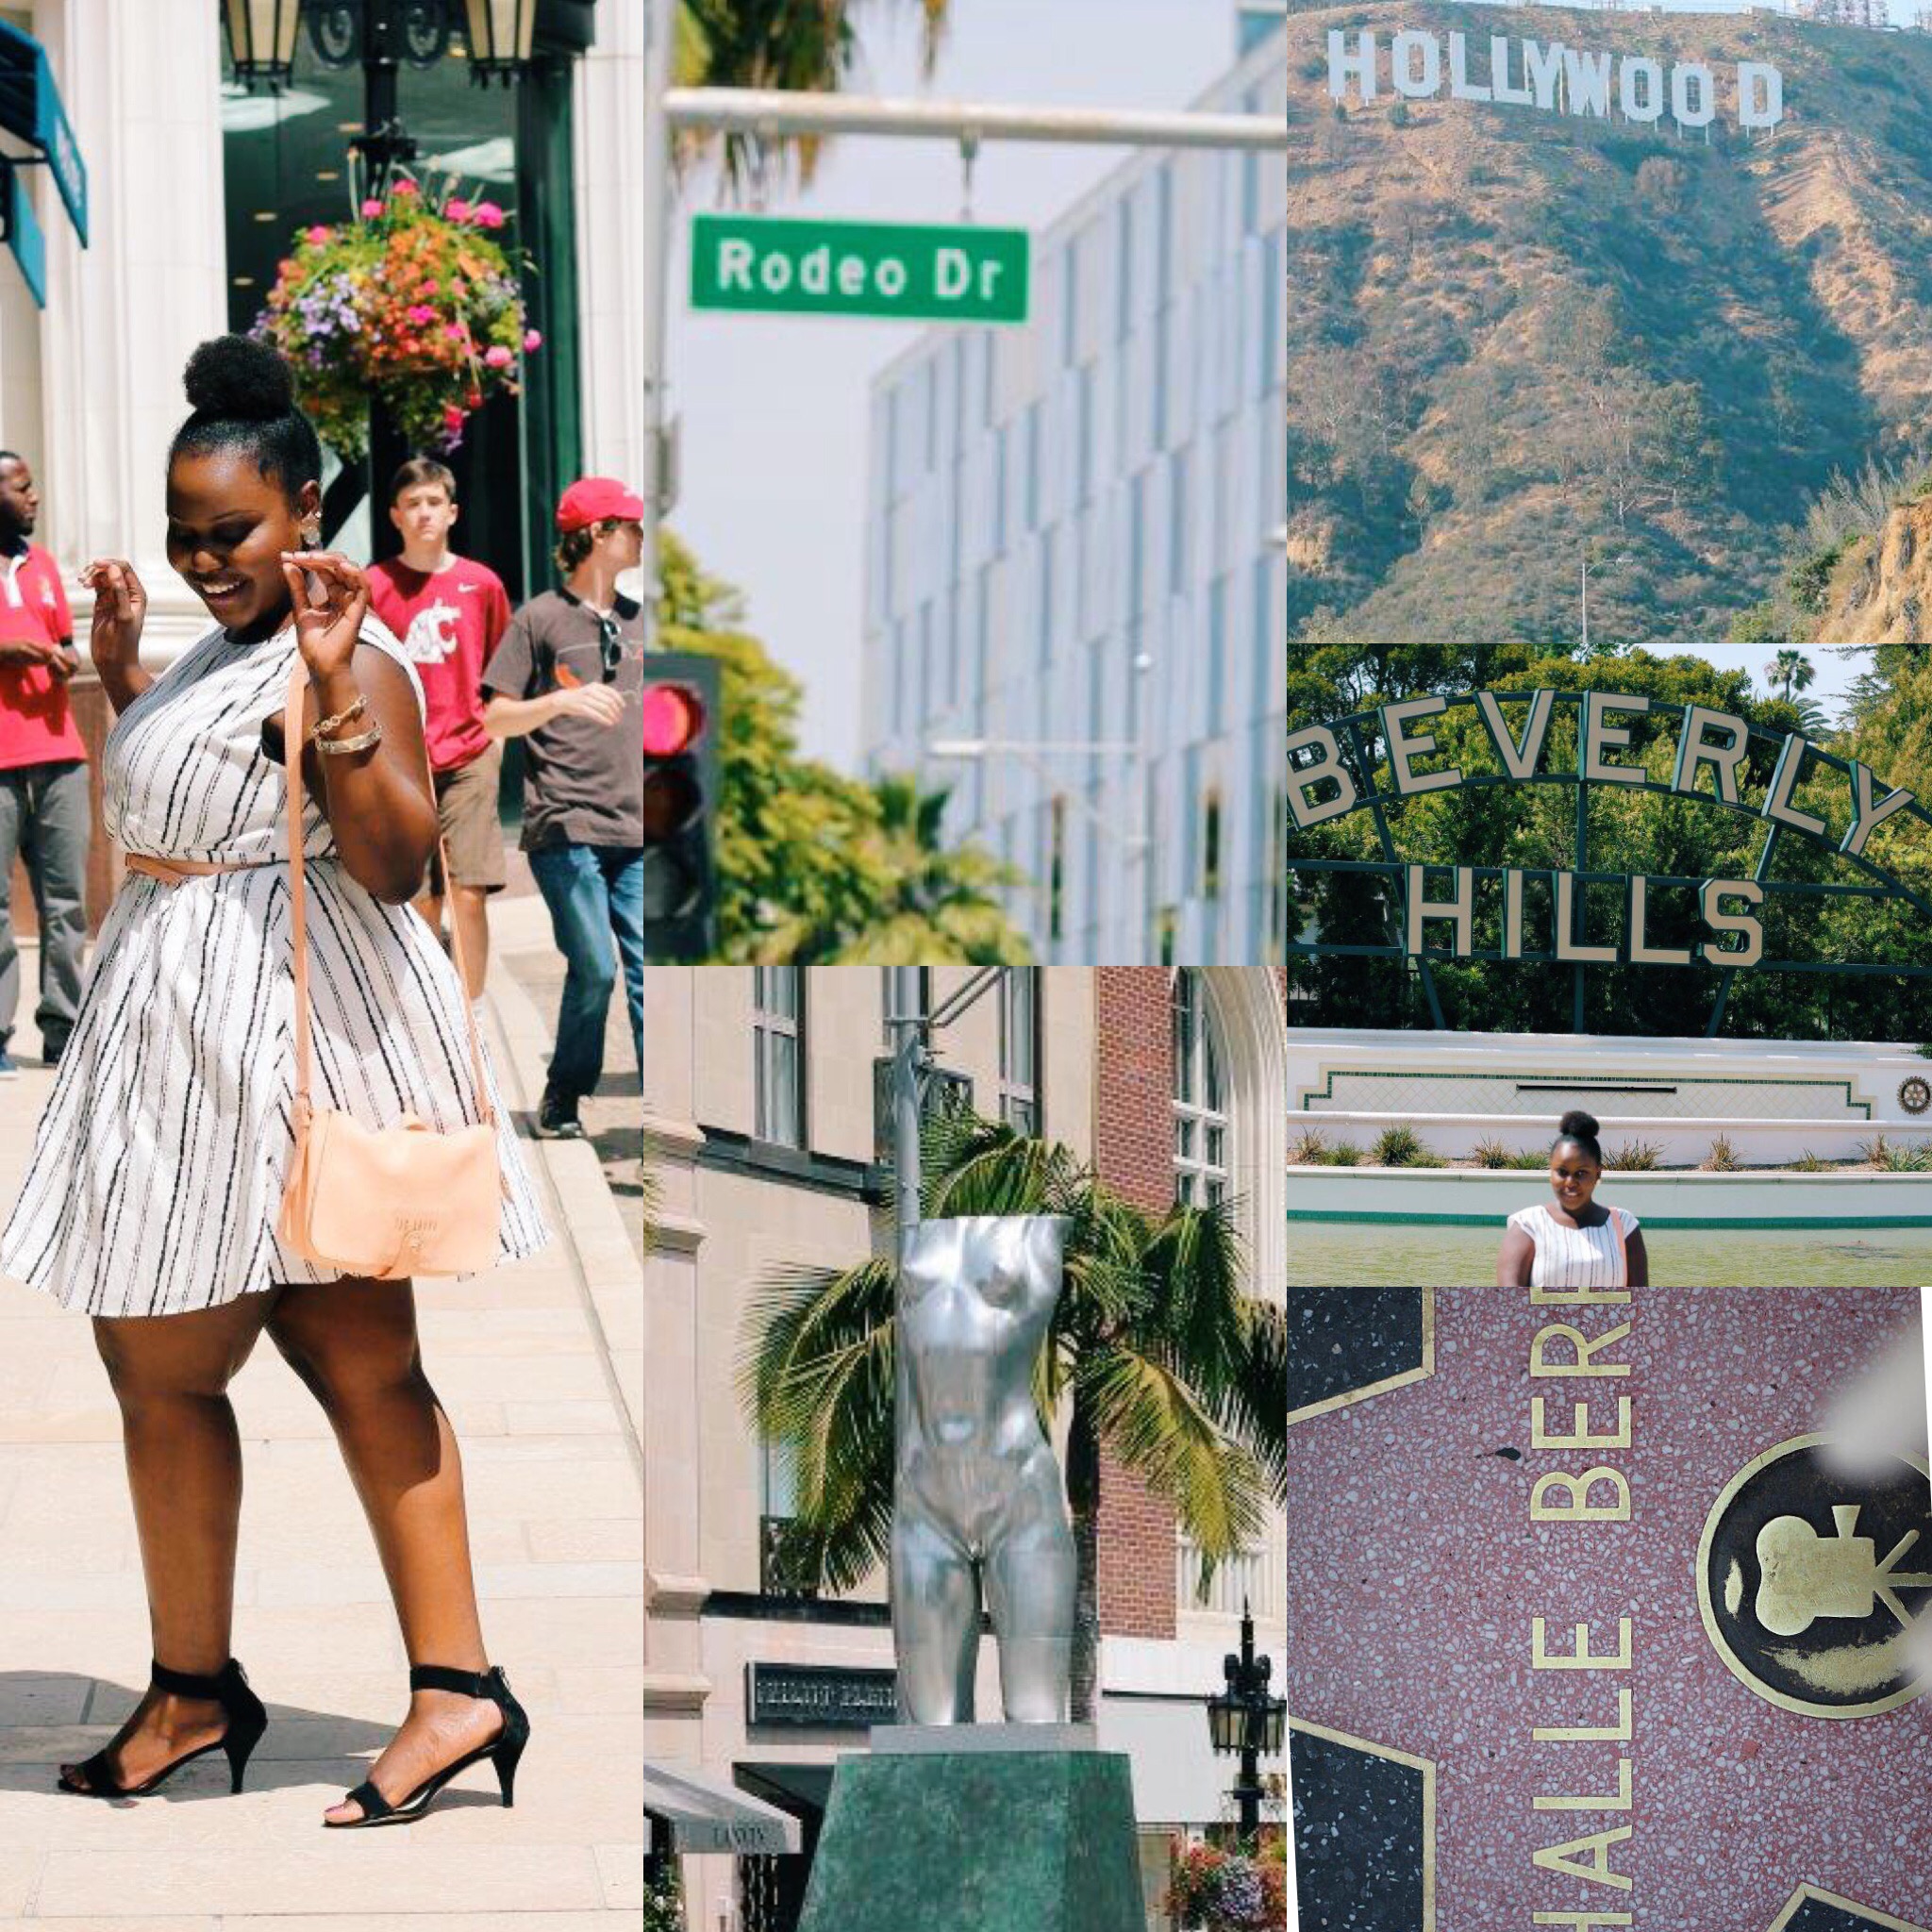 Los Angeles, beverly hills, Hollywood, carlifornia